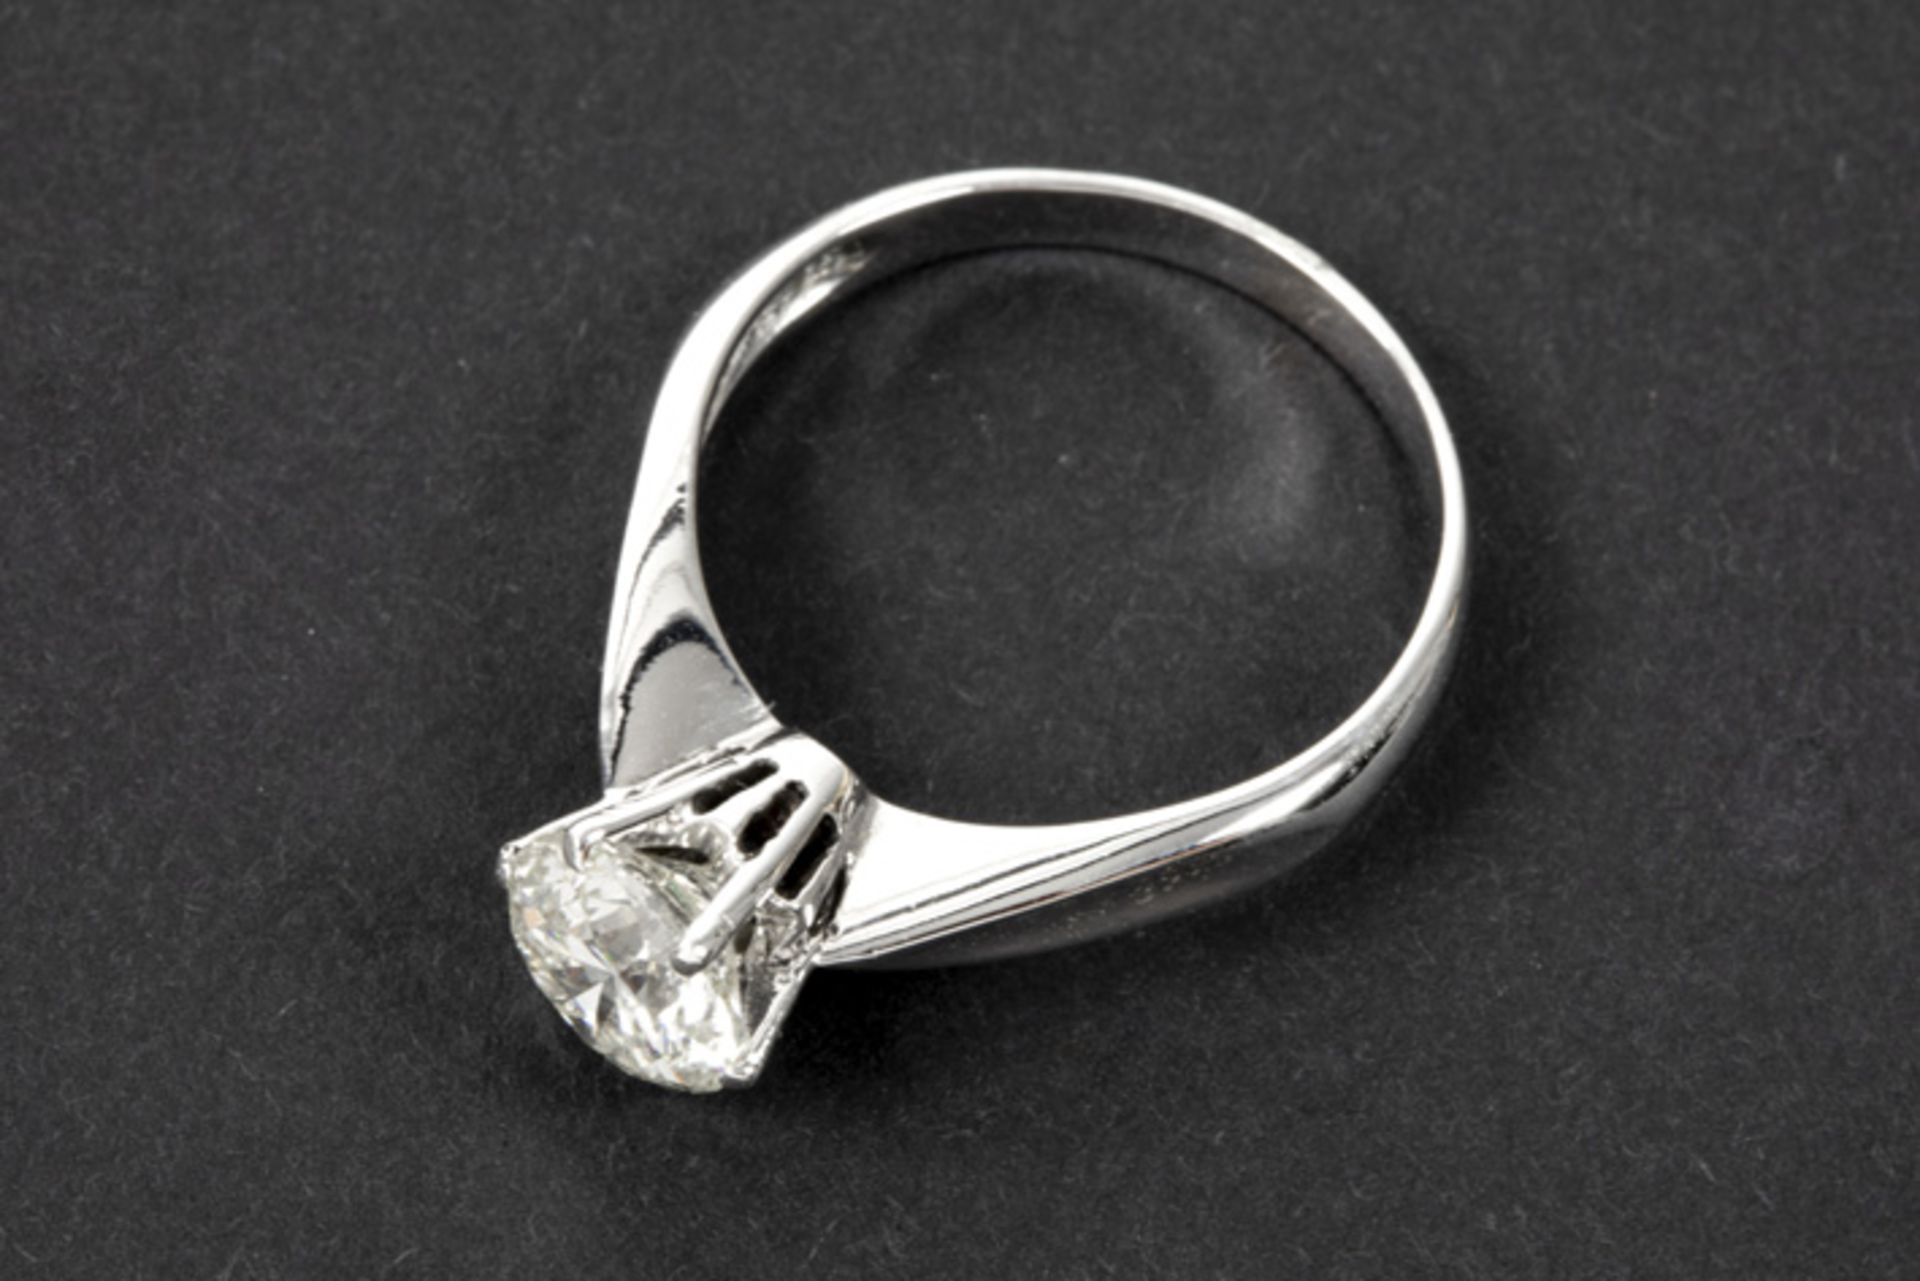 a ca 1,90 carat brilliant cut diamond set in a ring in white gold (18 carat) || Solitaire - Image 2 of 2